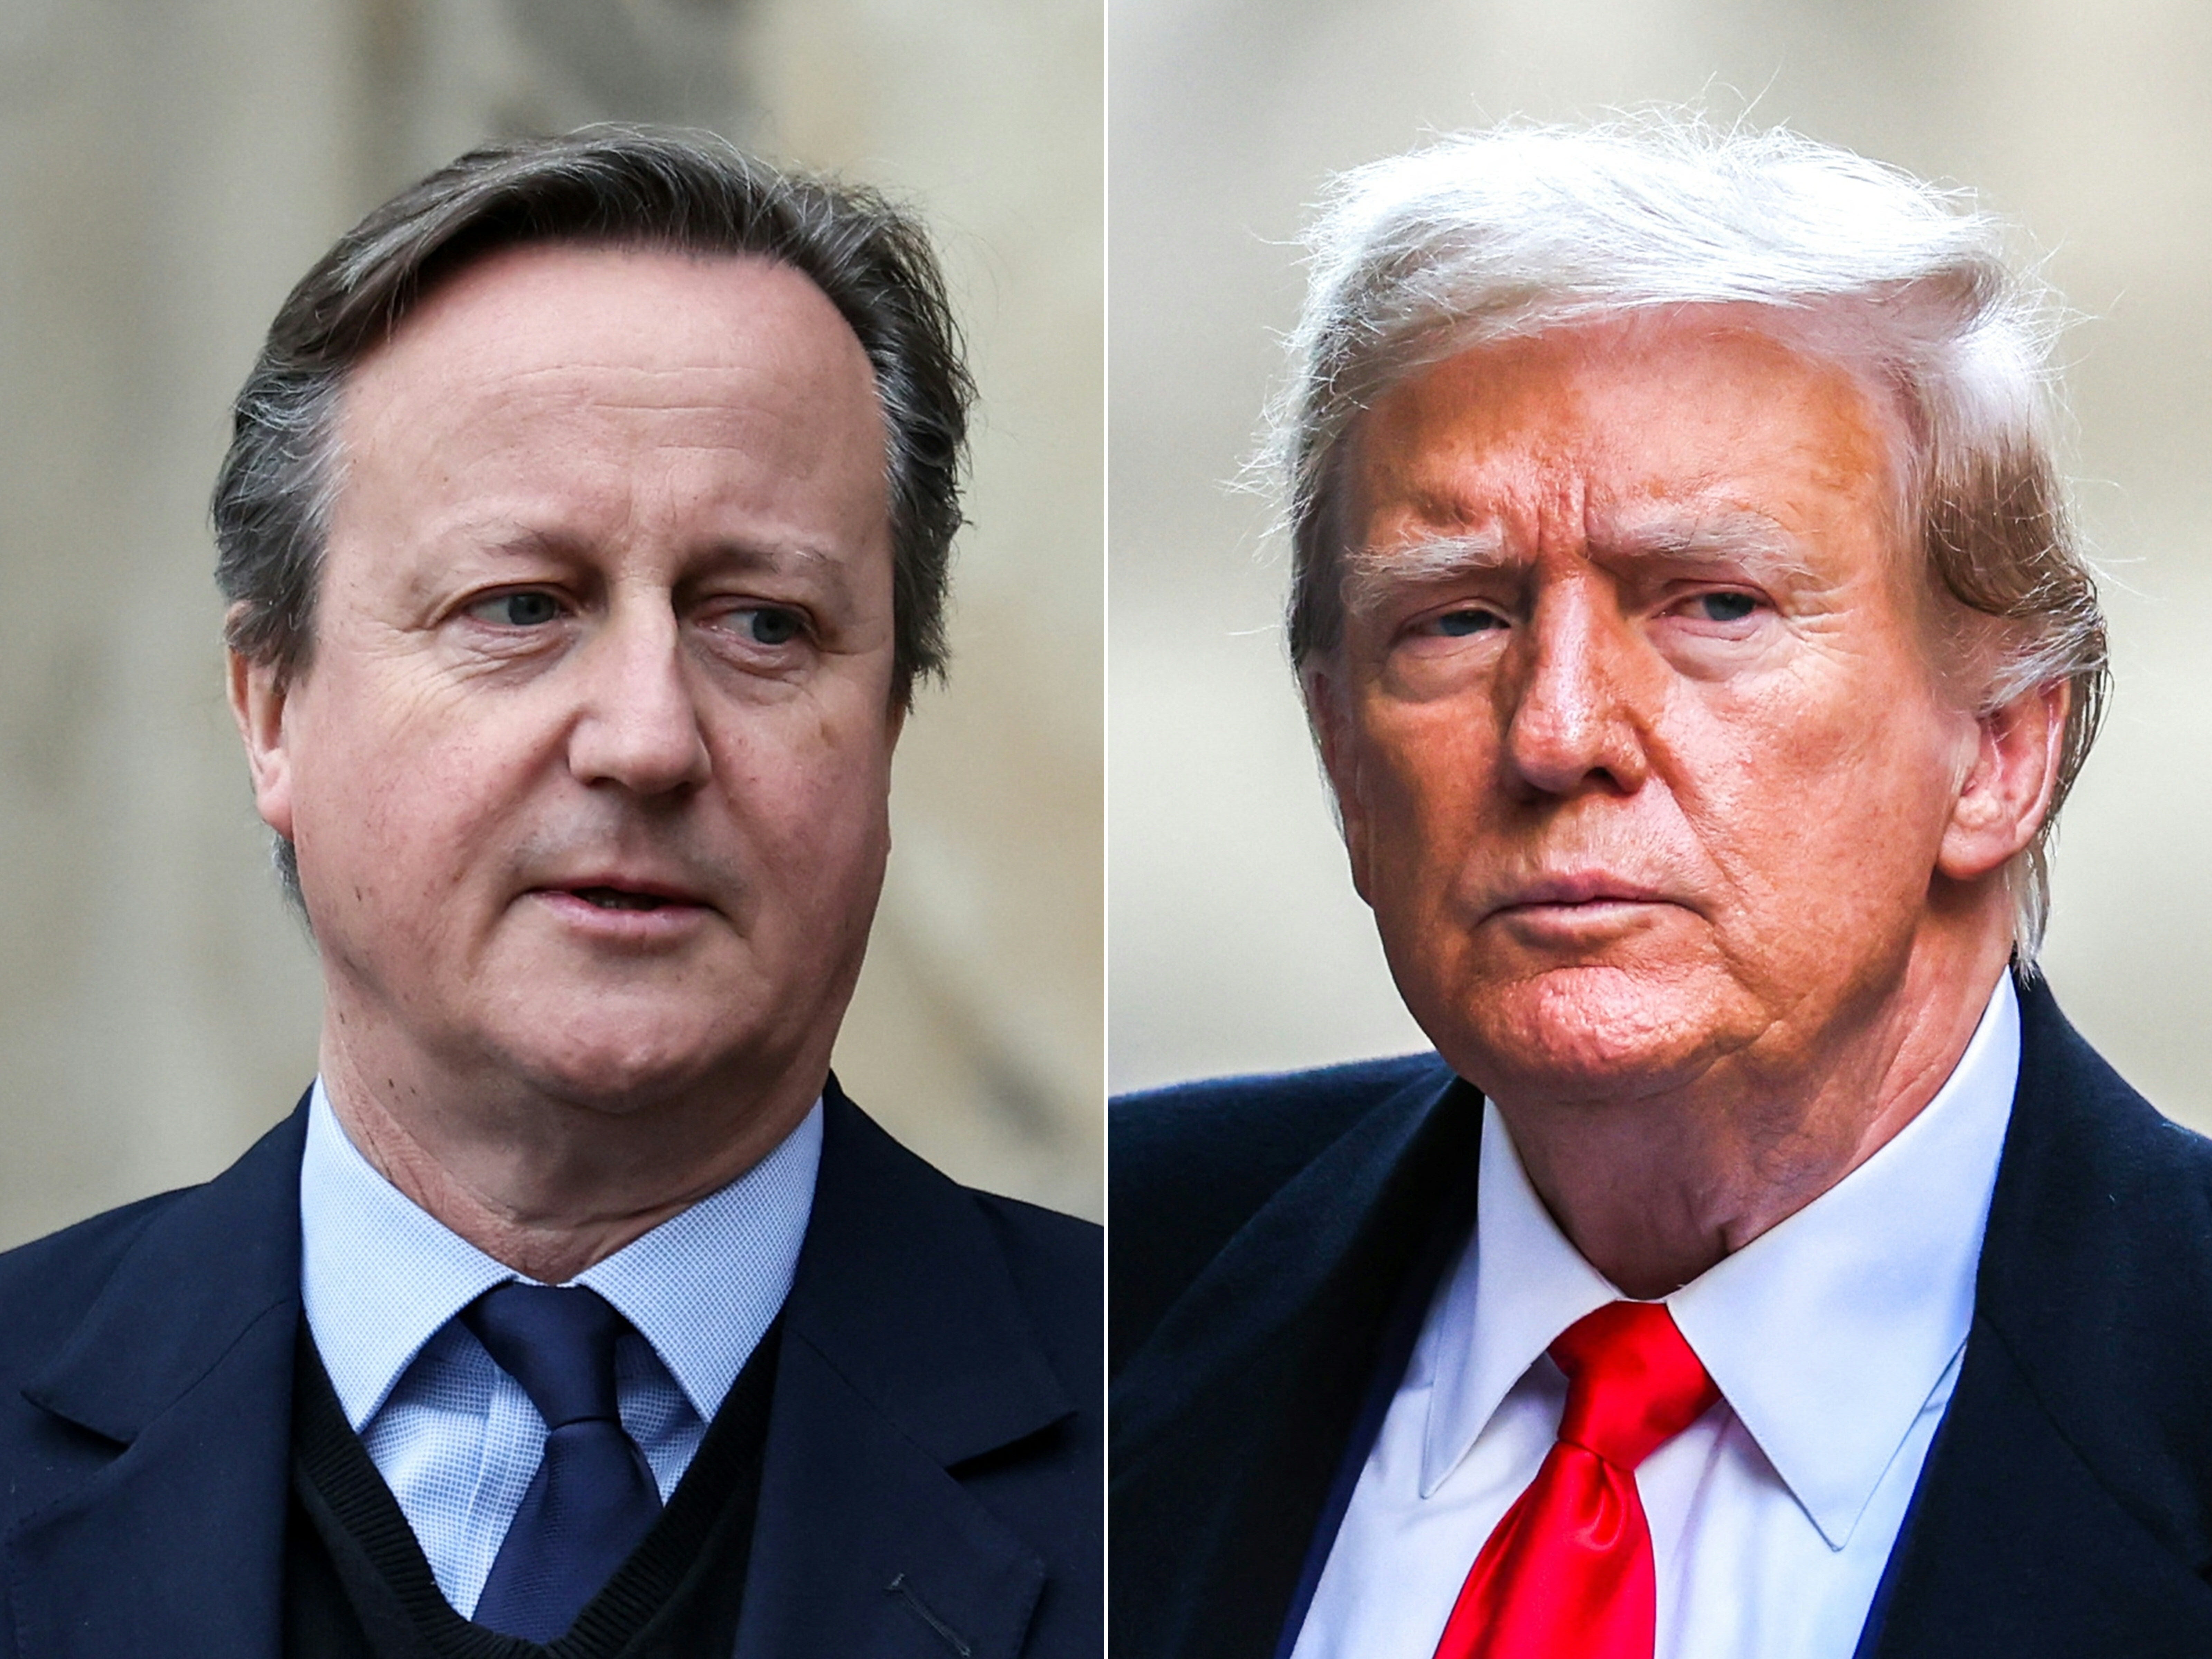 Cameron criticised Trump when both men were heads of state but now is a good time to breach protocols